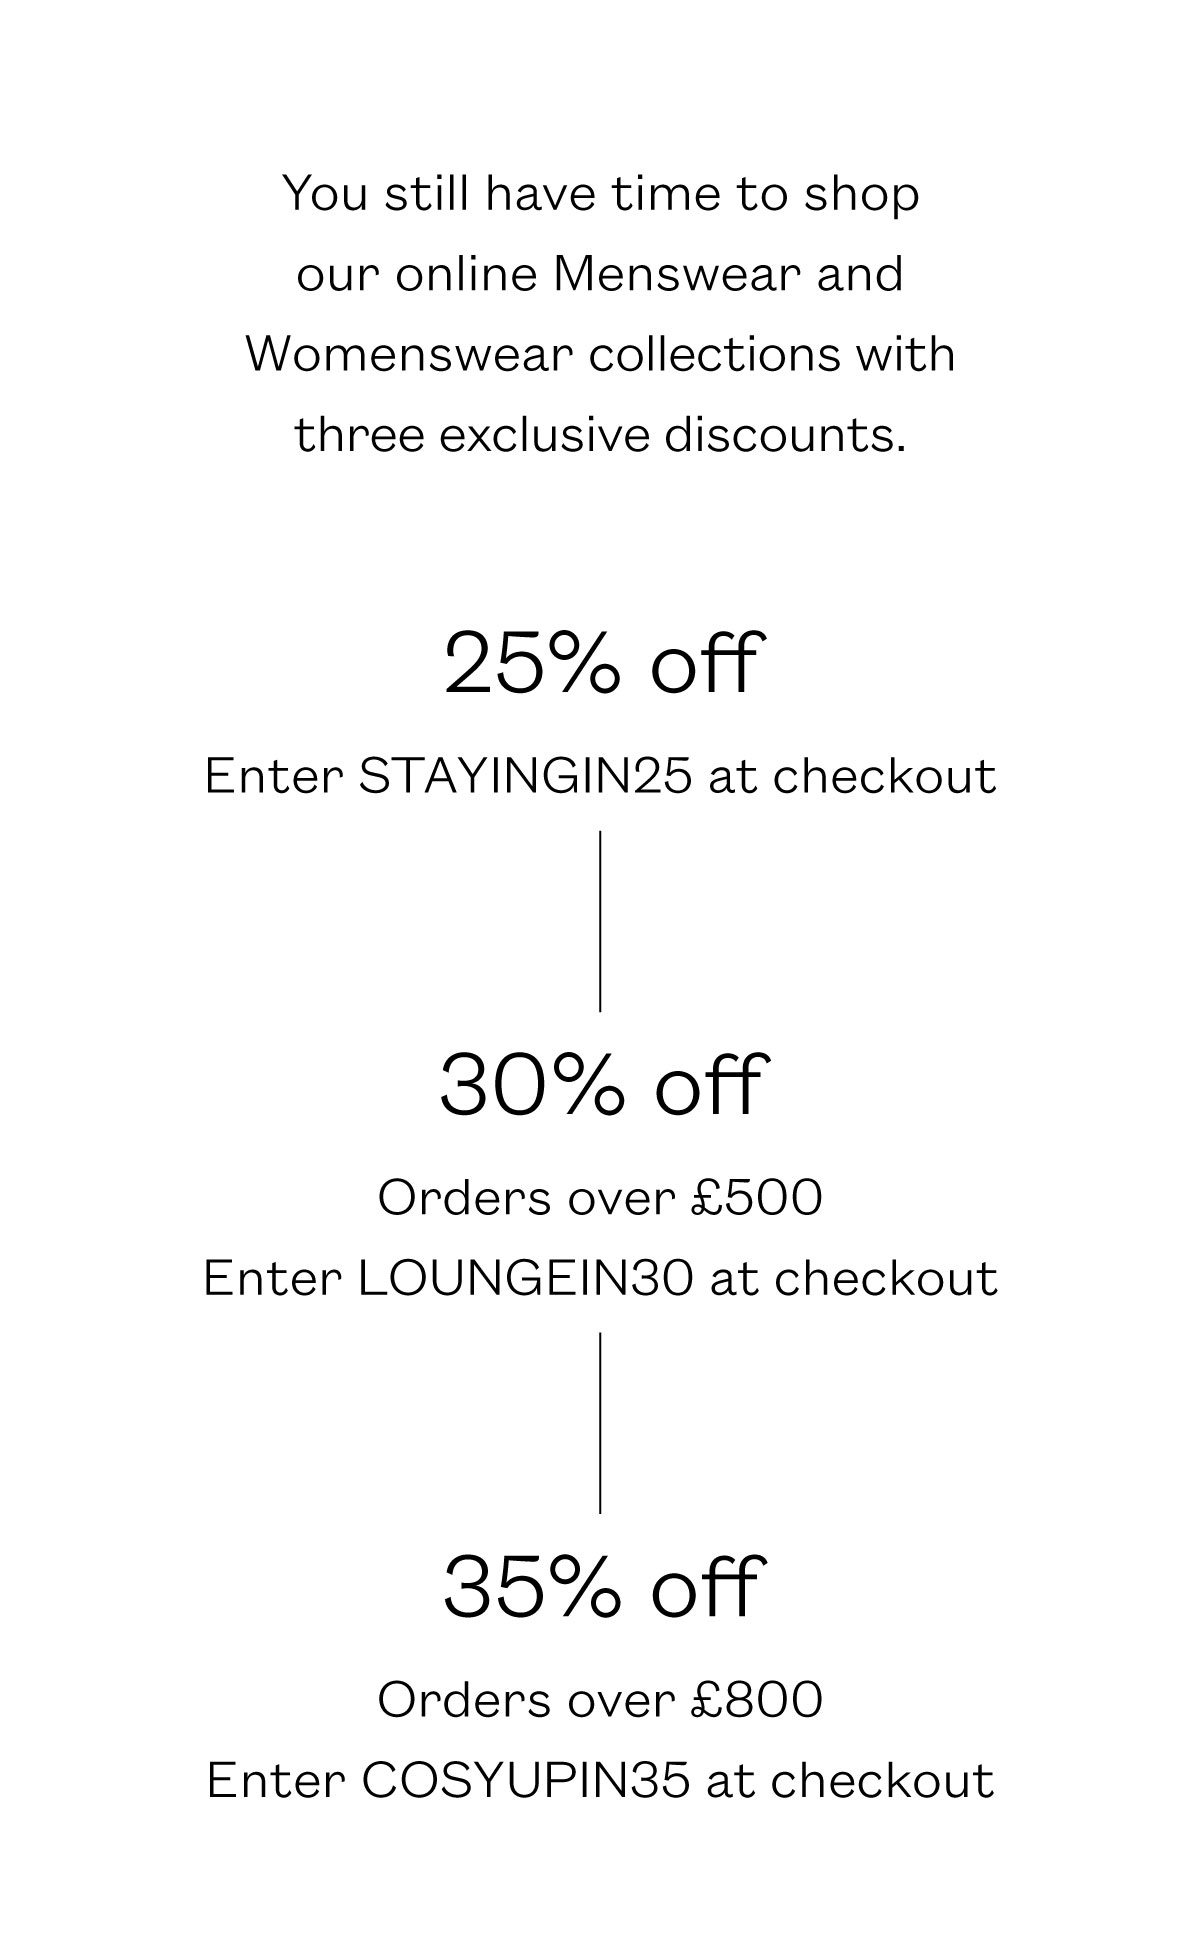 You still have time to shop our online Menswear and Womenswear collections with three exclusive discounts.    25% off Enter STAYINGIN25 at checkout     30% off Orders over ?500 Enter LOUNGEIN30 at checkout     35% off Orders over ?800 Enter COSYUPIN35 at checkout